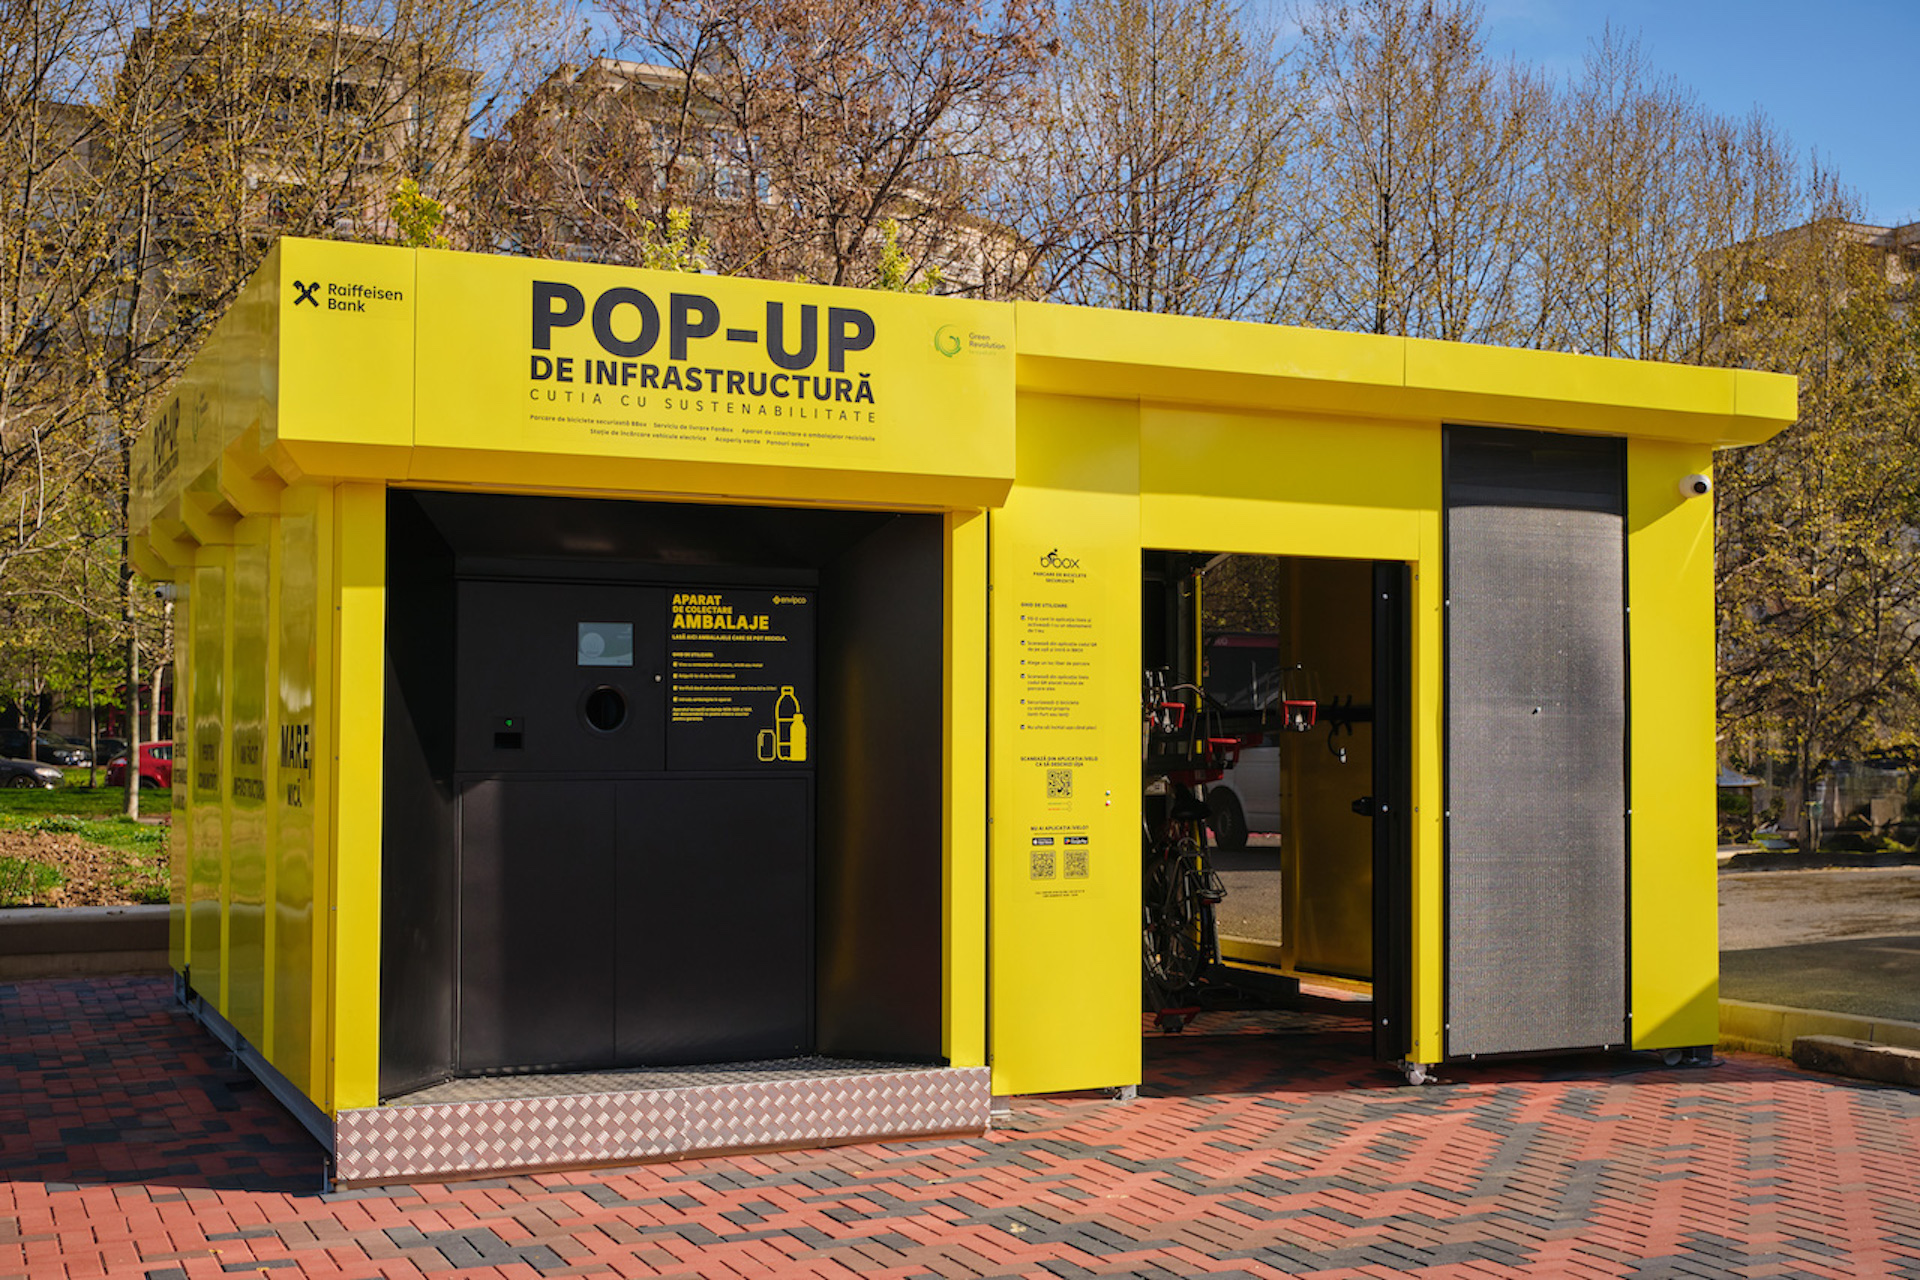 Romanian urban ecology NGO unveils first green pop-up infrastructure module in Bucharest